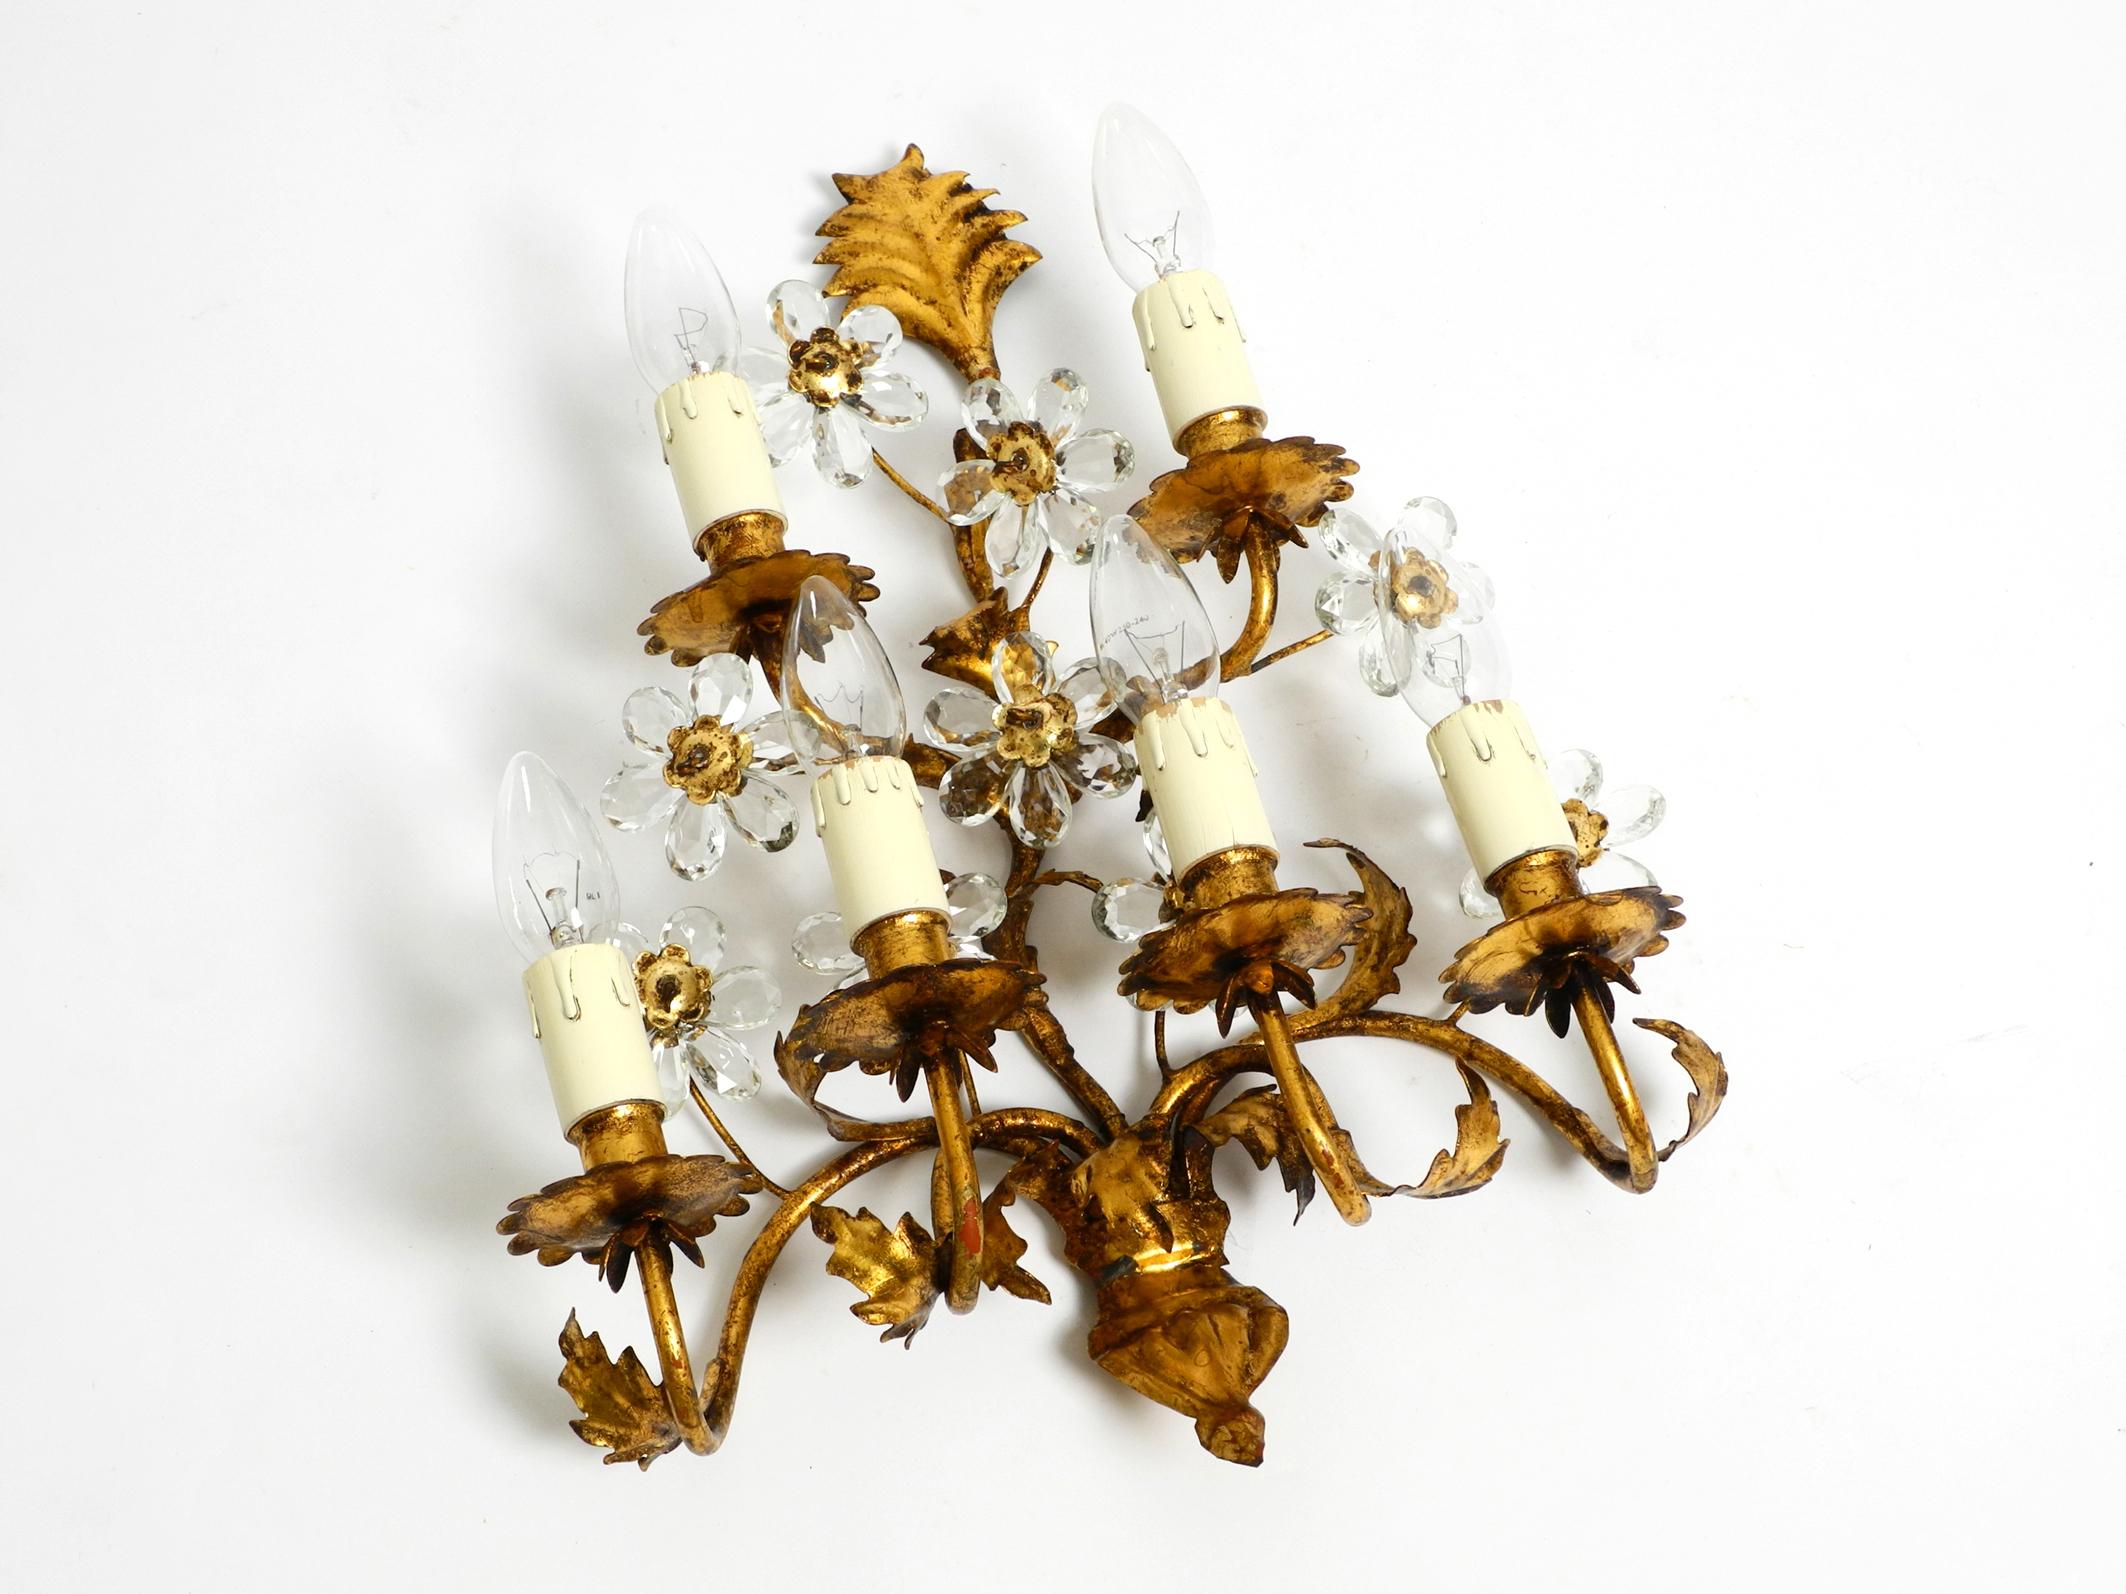 Beautiful large 1960's Italian gold plated wall lamp with six sockets.
Manufacturer is Banci Firenze. Made in Italy.
Very elegant design with transparent crystal glass flowers and frame made of gold-plated metal.
Fully functional with six E14